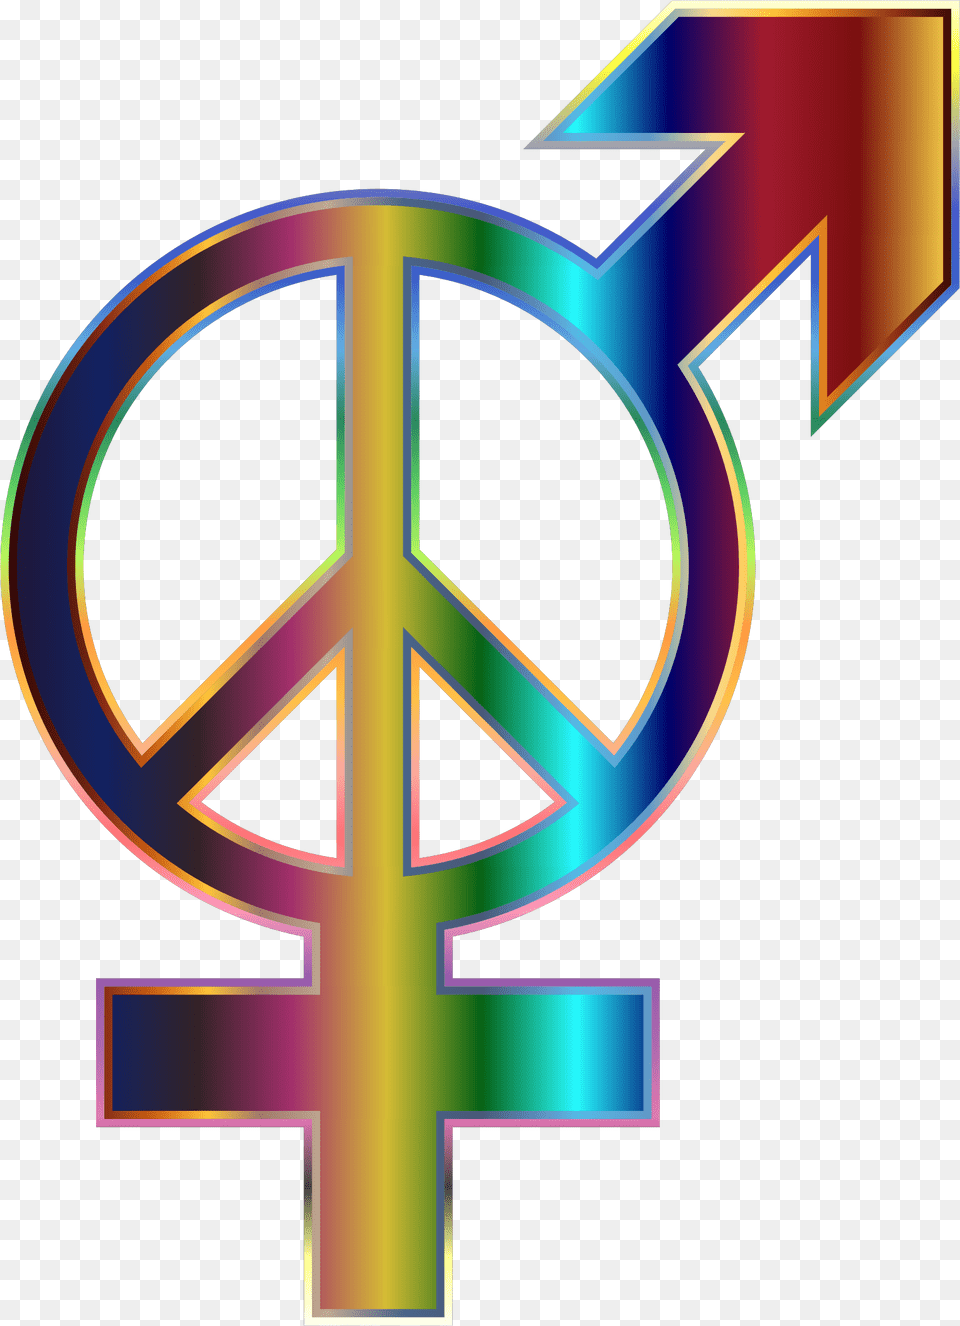 Psychedelic Gender Peace No Background Icons, Symbol, Logo Png Image